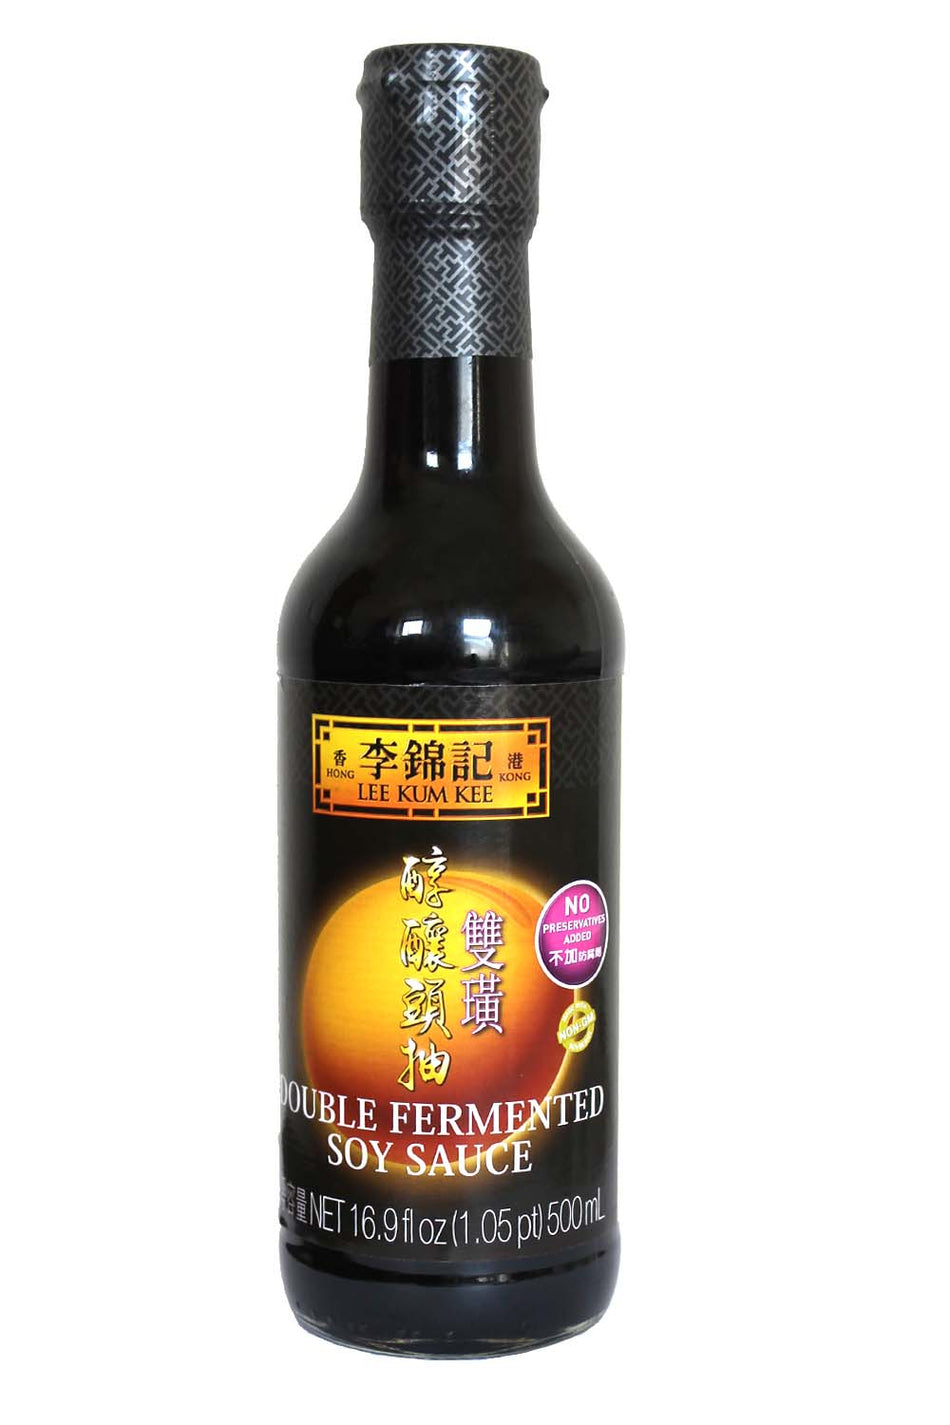 Lee Kum Kee Double Fermented Soy Sauce